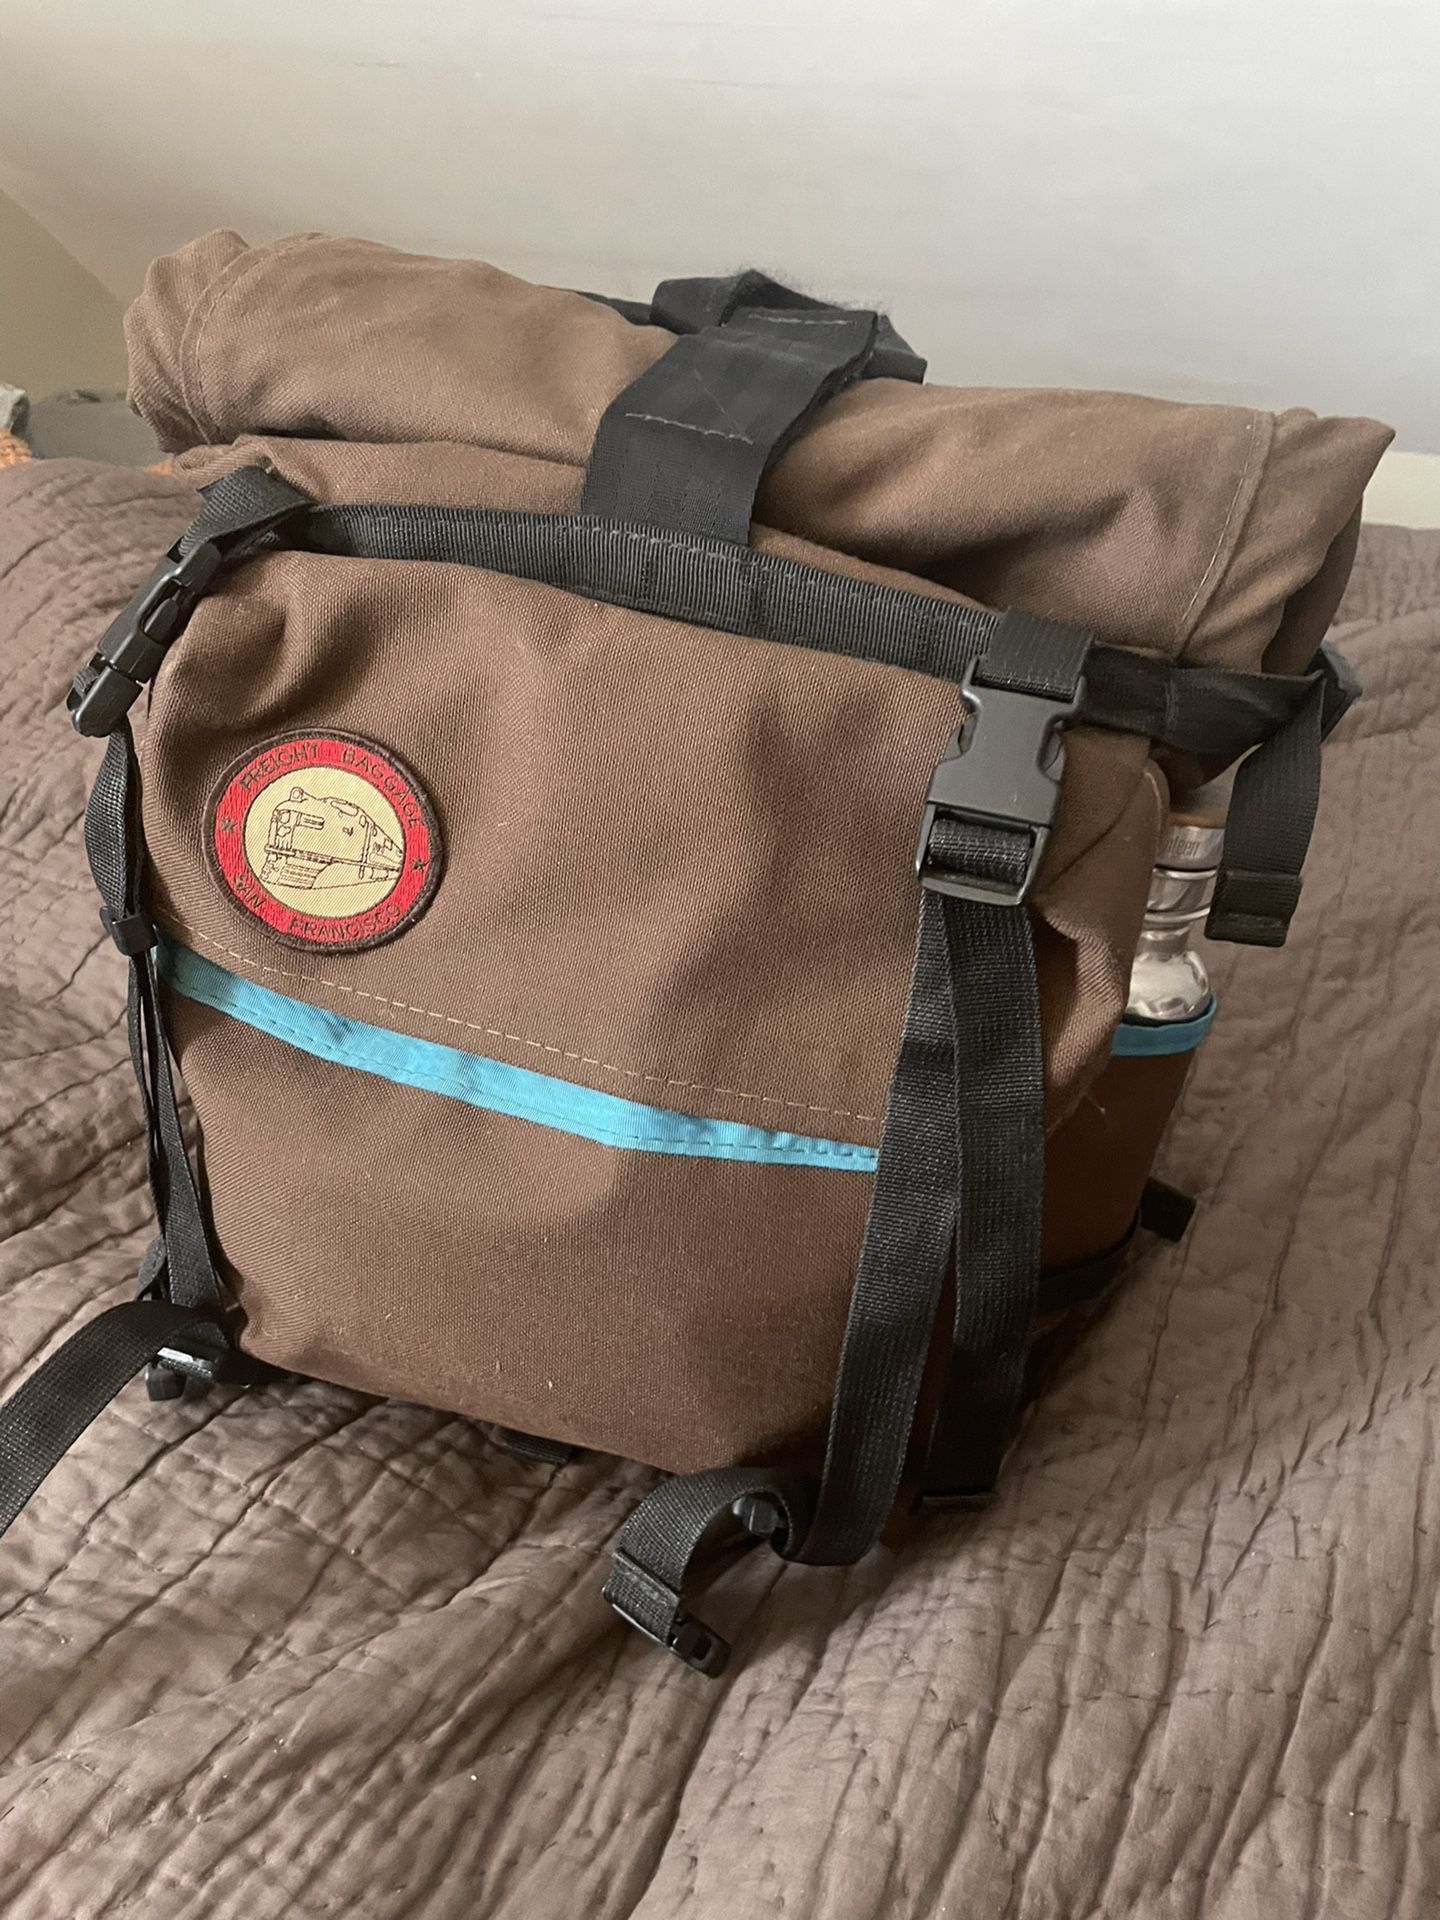 Freight baggage Cycling Rolltop Backpack for Sale in Chicago, IL - OfferUp